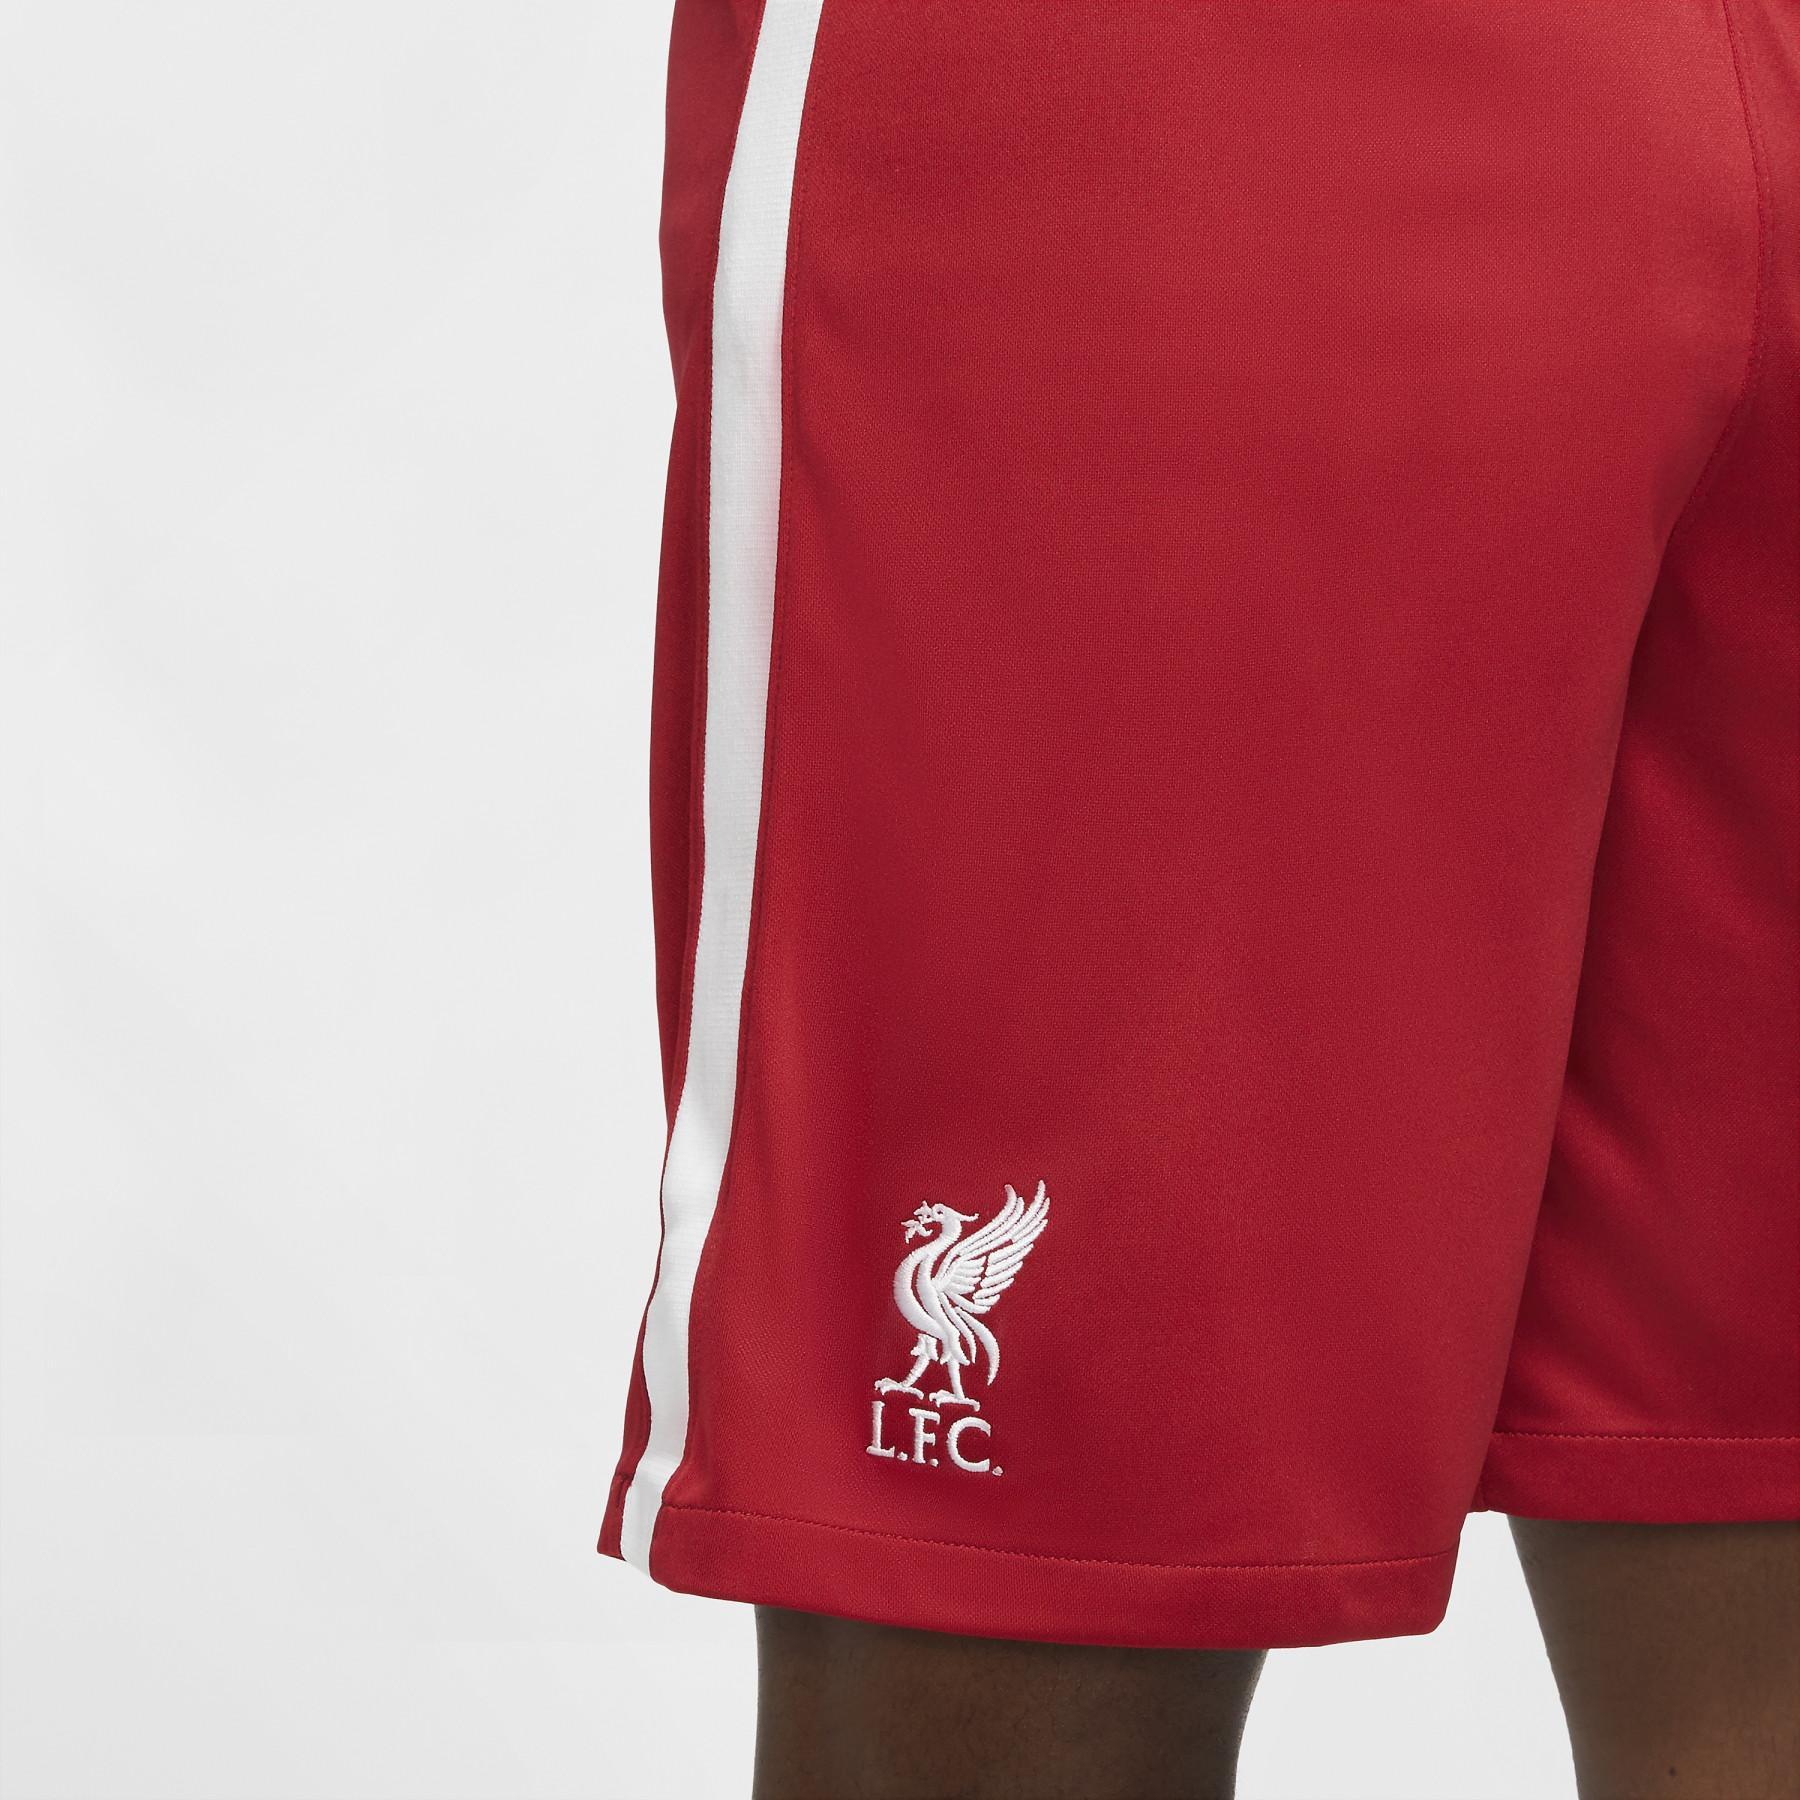 Home shorts liverpool stadion 2020/21